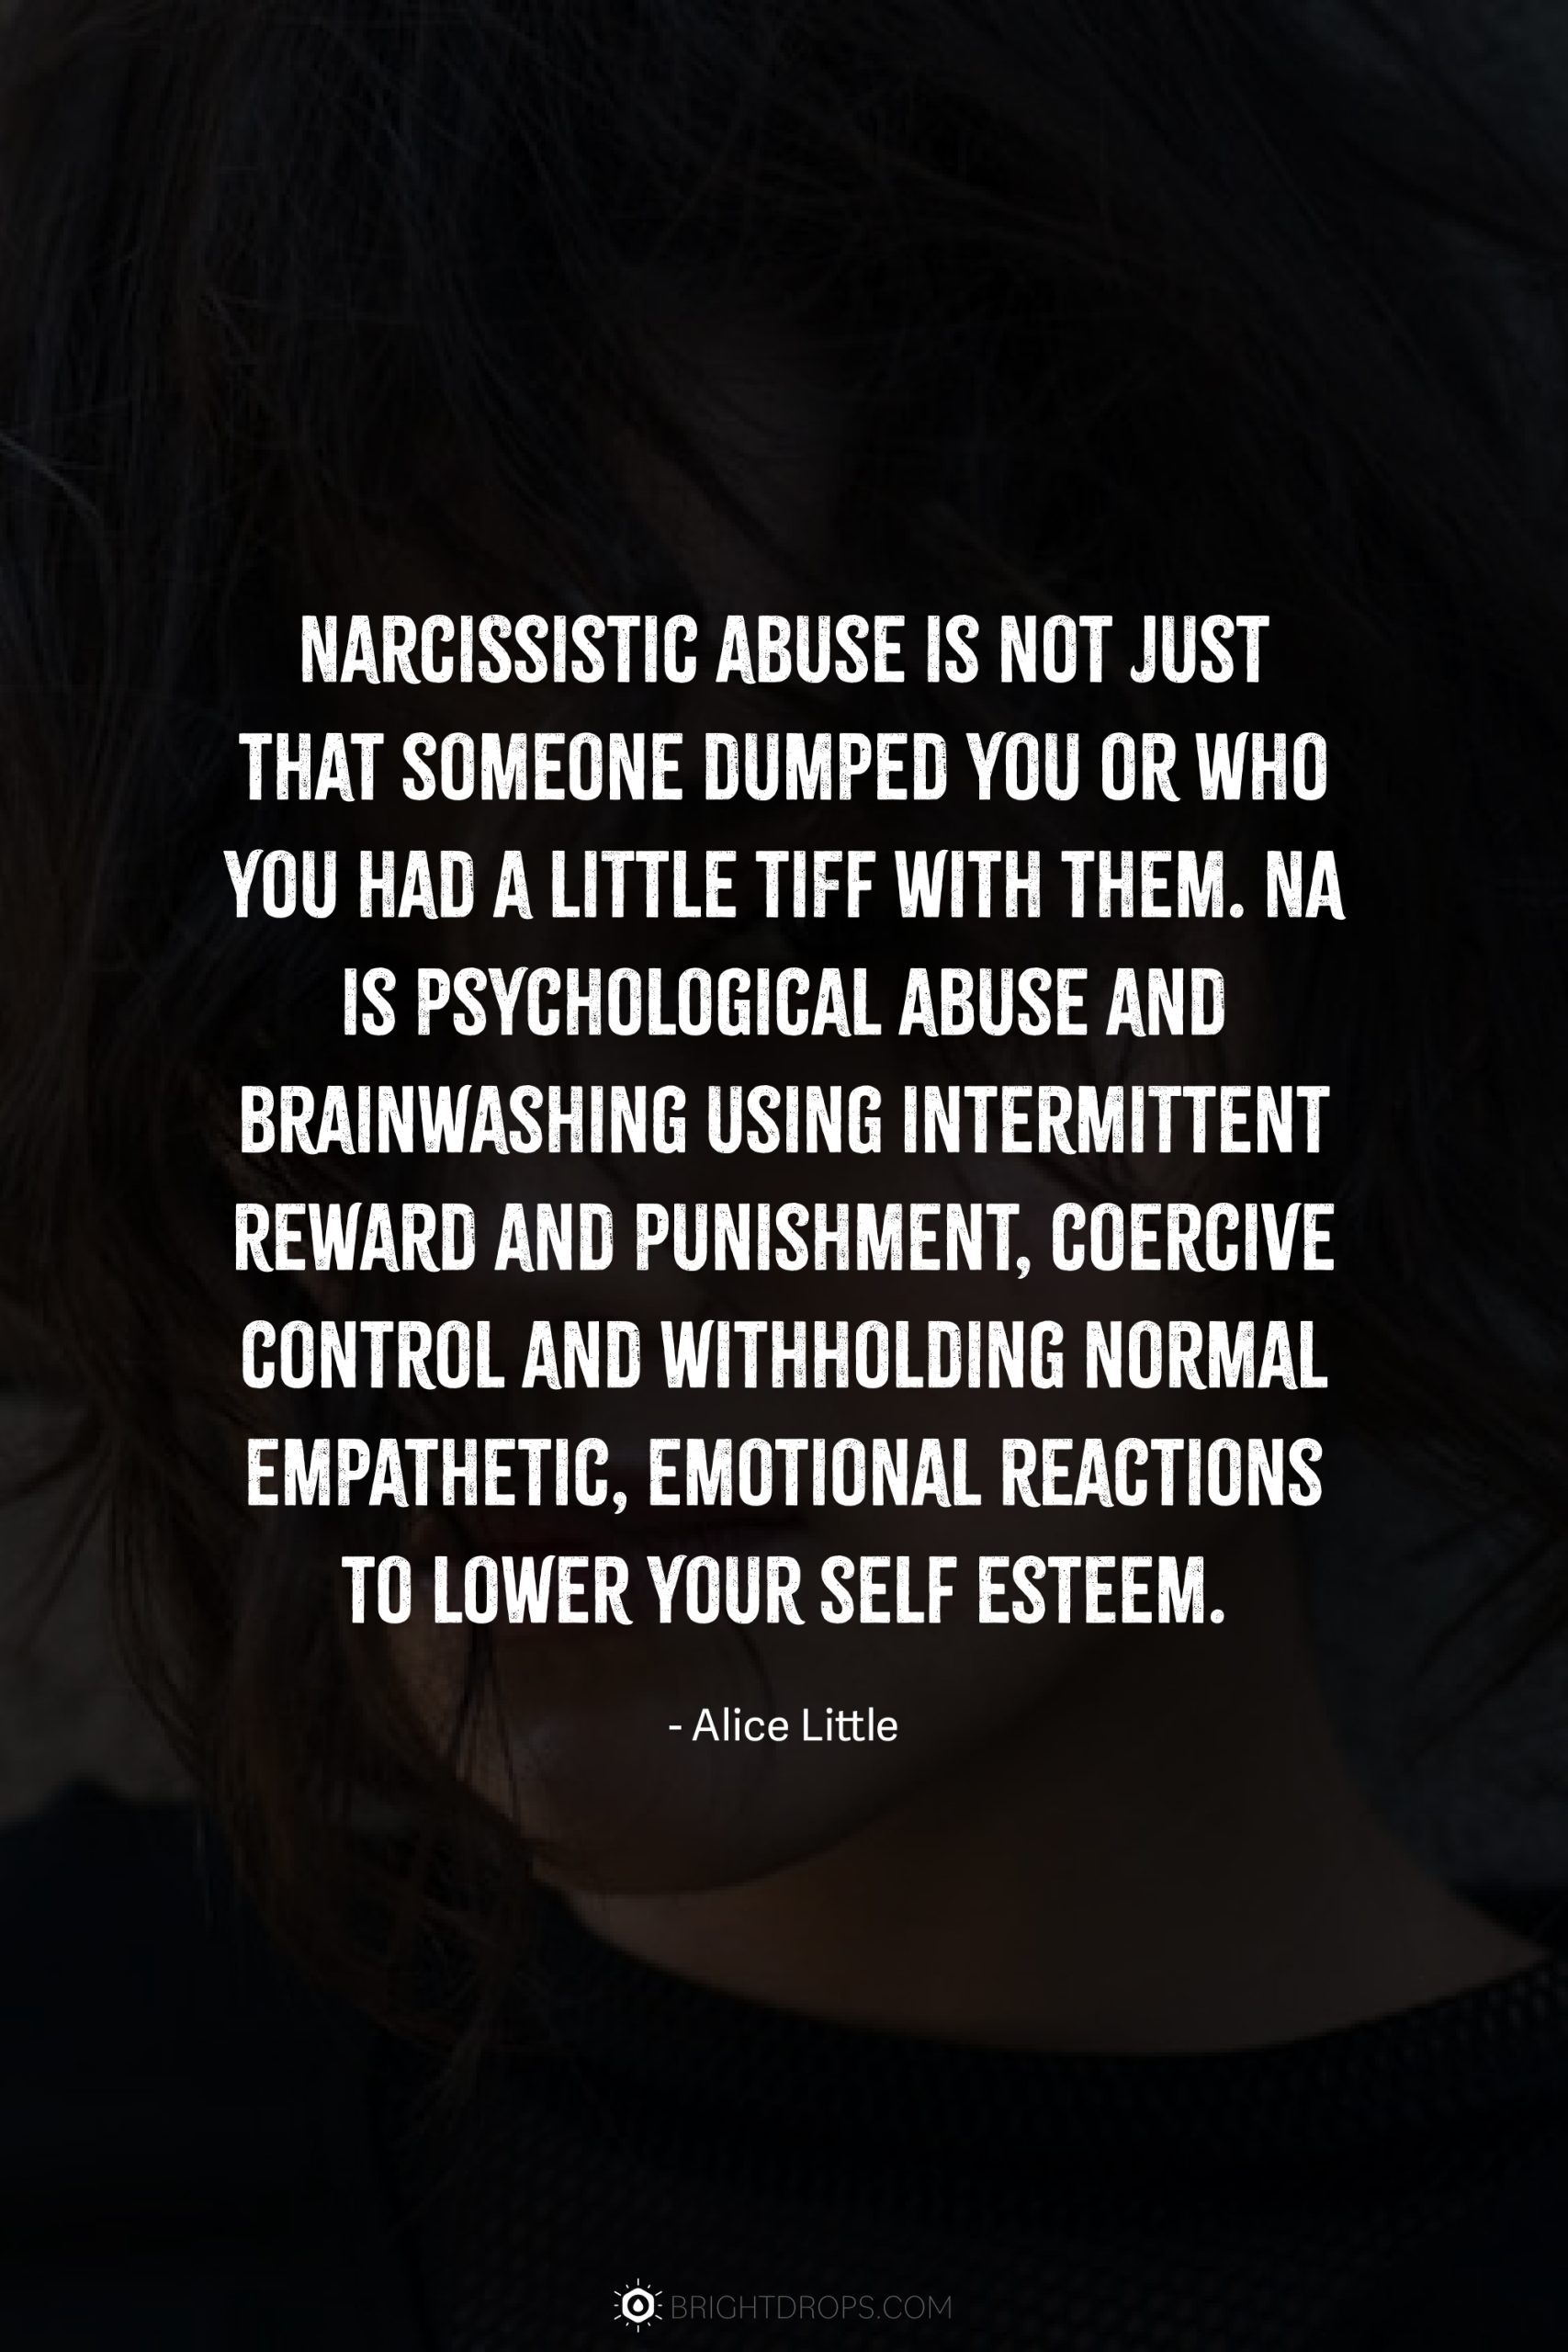 Narcissistic abuse is not just that someone dumped you or who you had a little tiff with them. NA is psychological abuse and brainwashing using intermittent reward and punishment, coercive control and withholding normal empathetic, emotional reactions to lower your self esteem.